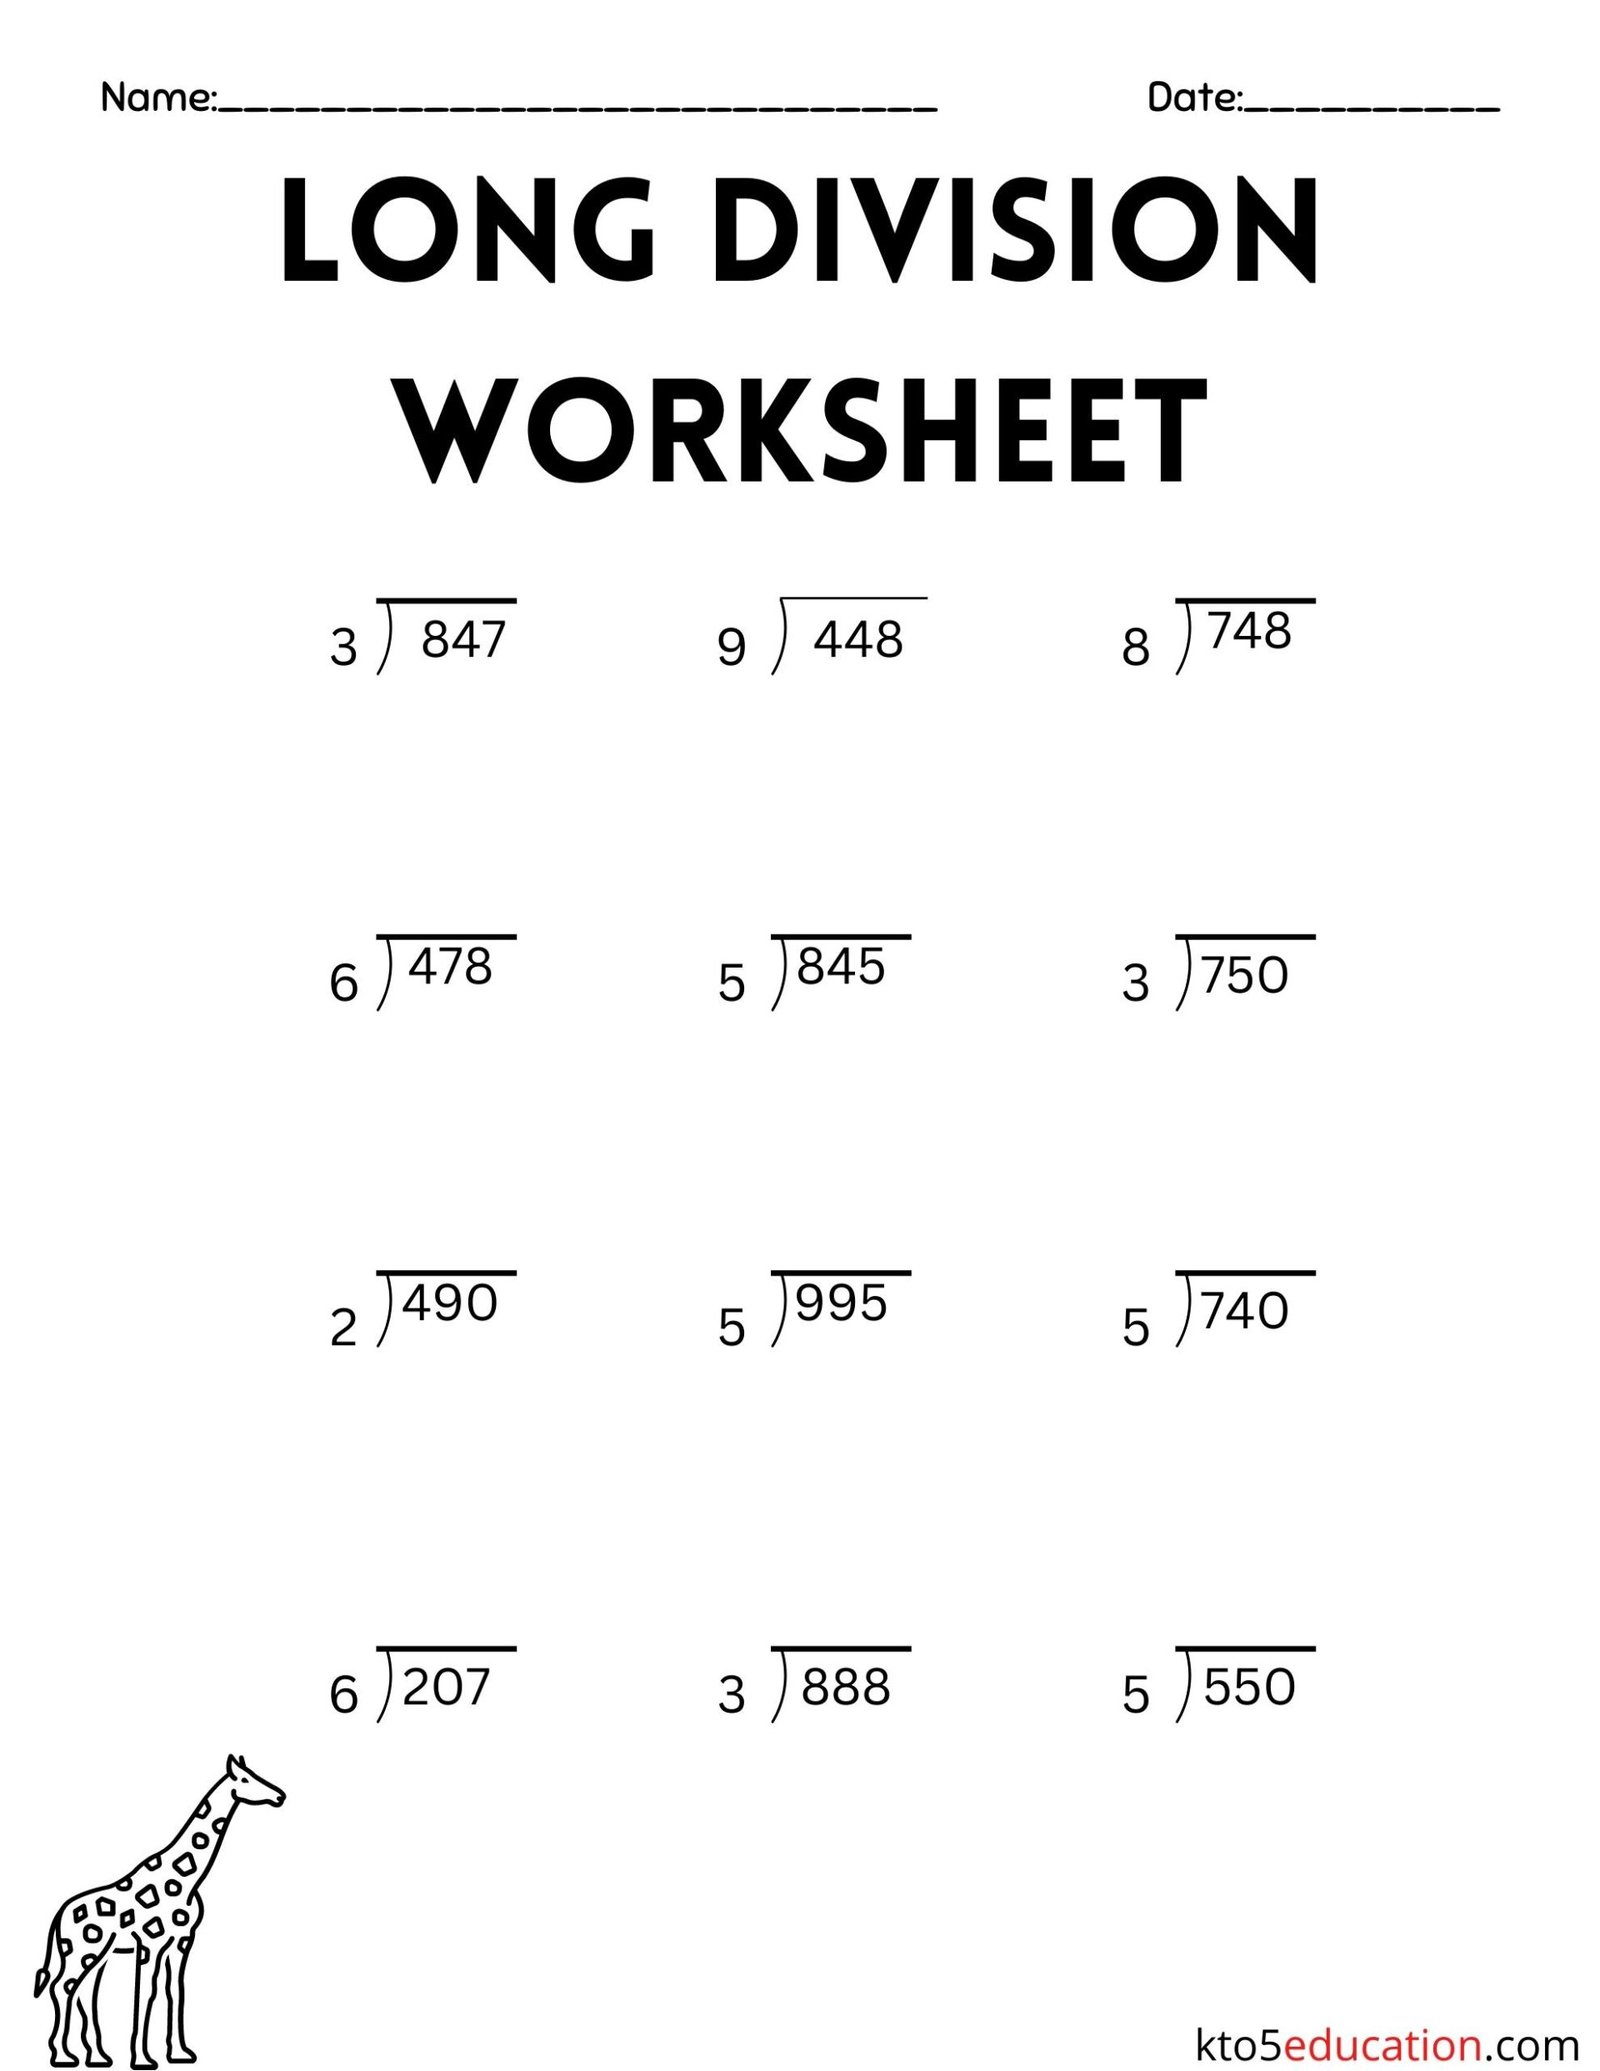 What Is Division Worksheet